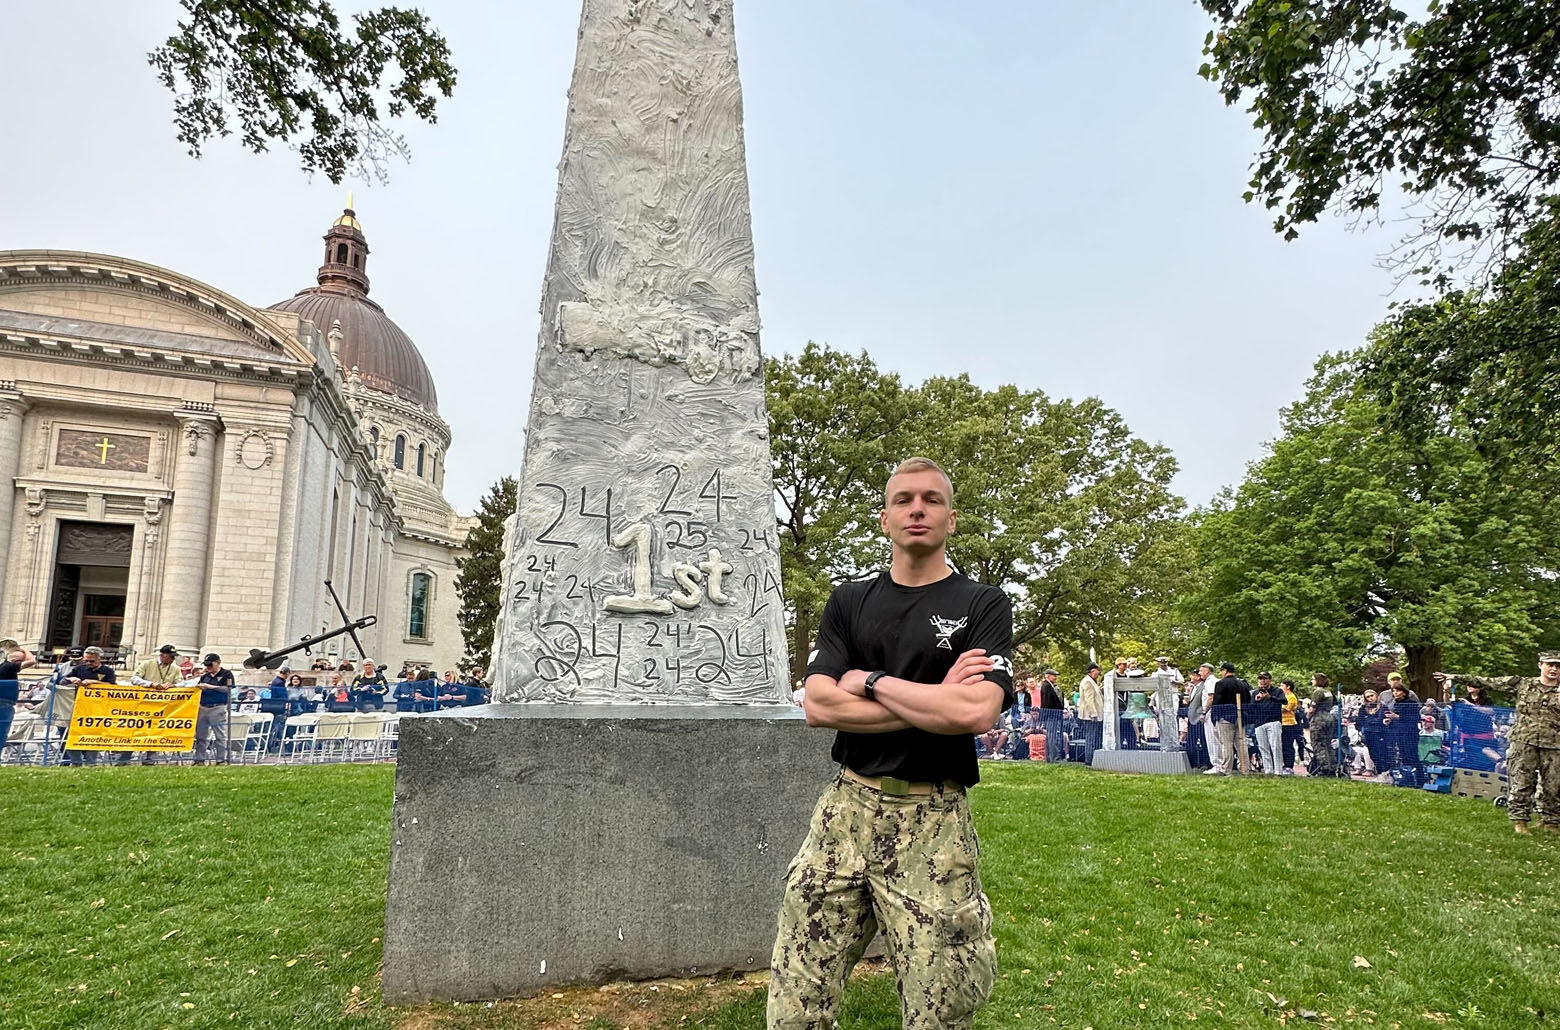 The greased Herndon monument prepared for the 2023 class to climb (WTOP/Matt Kaufax)